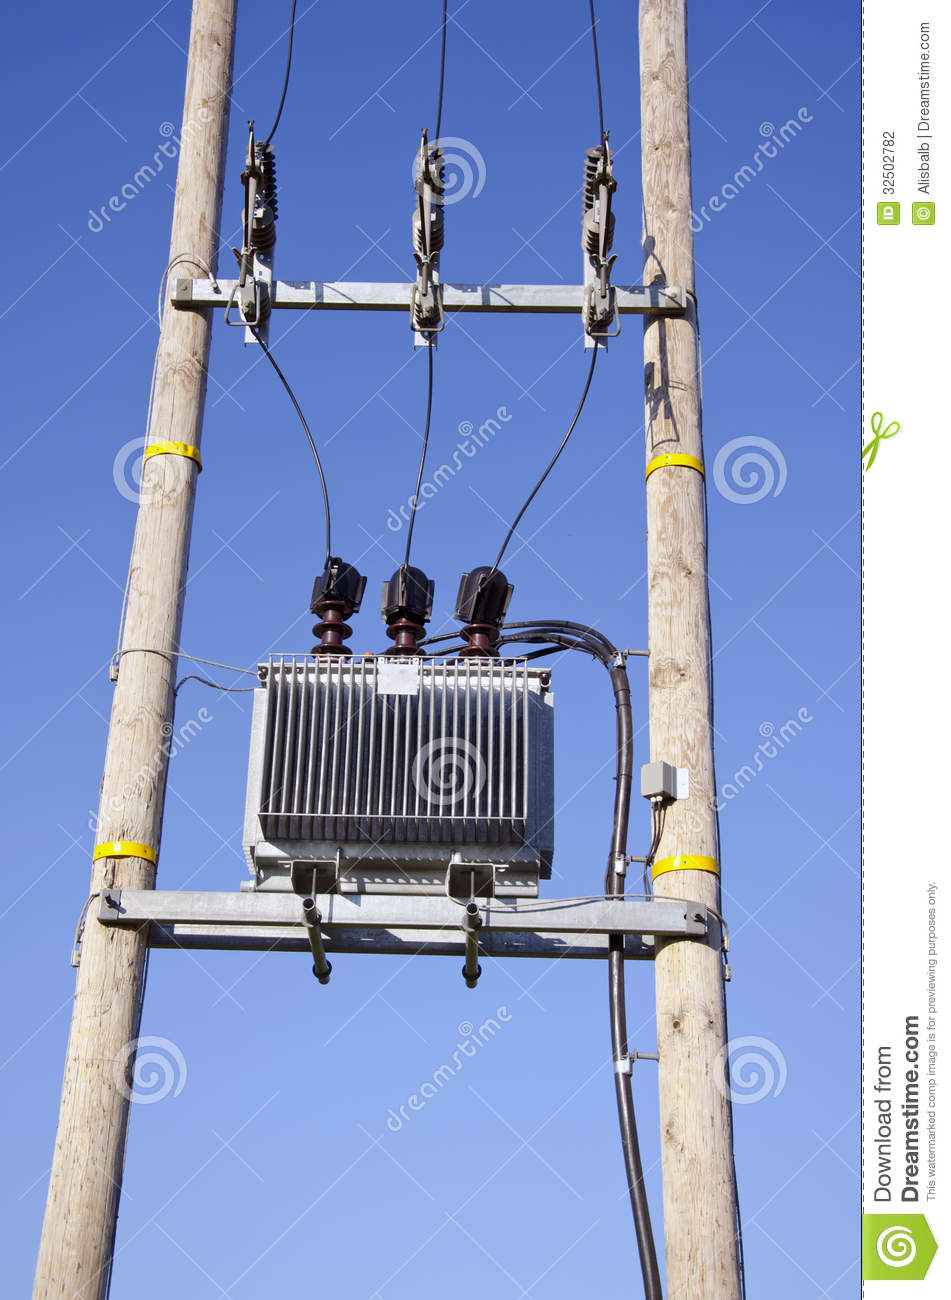 Wooden Utility Pole With Power Lines And Transformer On Sky Stock